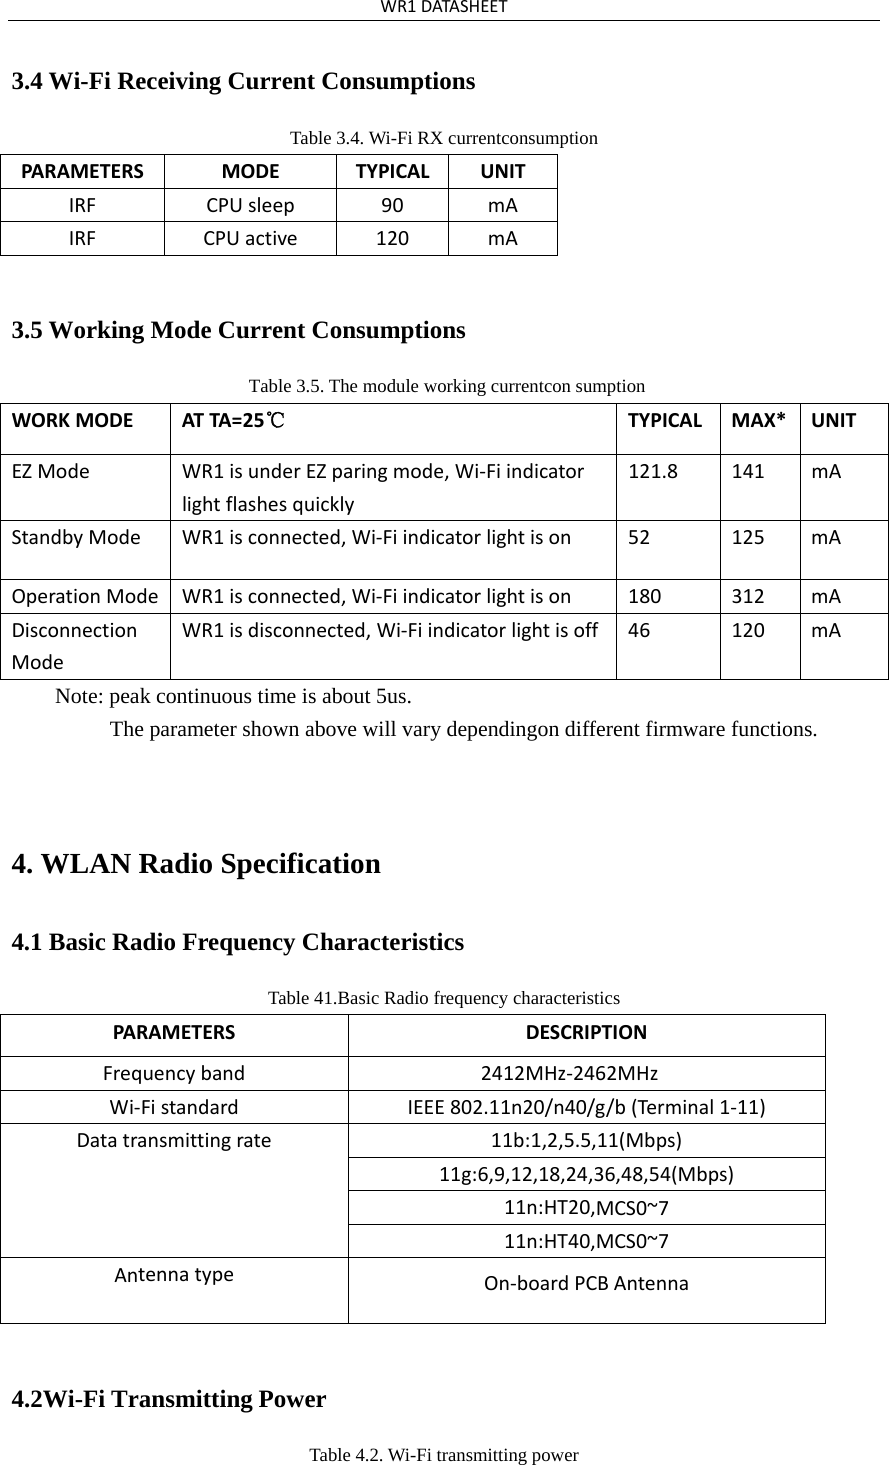 WR1DATASHEET3.4 Wi-Fi Receiving Current Consumptions Table 3.4. Wi-Fi RX currentconsumption PARA MET ERSMODETYPICALUNITIRFCPUsleep90mAIRFCPUactive120mA3.5 Working Mode Current Consumptions Table 3.5. The module working currentcon sumption WORKMODEATTA= 2 5 ℃TYPICALMAX*UNITEZModeWR1isunderEZparingmode,Wi‐Fiindicatorlightflashesquickly121.8141mAStandbyModeWR1isconnected,Wi‐Fiindicatorlightison52125mAOperationModeWR1isconnected,Wi‐Fiindicatorlightison180312mADisconnectionModeWR1isdisconnected,Wi‐Fiindicatorlightisoff 46120mANote: peak continuous time is about 5us. The parameter shown above will vary dependingon different firmware functions. 4. WLAN Radio Specification4.1 Basic Radio Frequency Characteristics Table 41.Basic Radio frequency characteristics PARA MET ERSDESCRIPTIONFrequencyband2412MHz-2462MHzWi‐FistandardIEEE802.11n20/n40/g/b(Terminal1‐11)Datatransmittingrate11b:1,2,5.5,11(Mbps)11g:6,9,12,18,24,36,48,54(Mbps)11n:HT20,MCS0~711n:HT40,MCS0~7AntennatypeOn‐boardPCBAntenna4.2Wi-Fi Transmitting Power Table 4.2. Wi-Fi transmitting power 